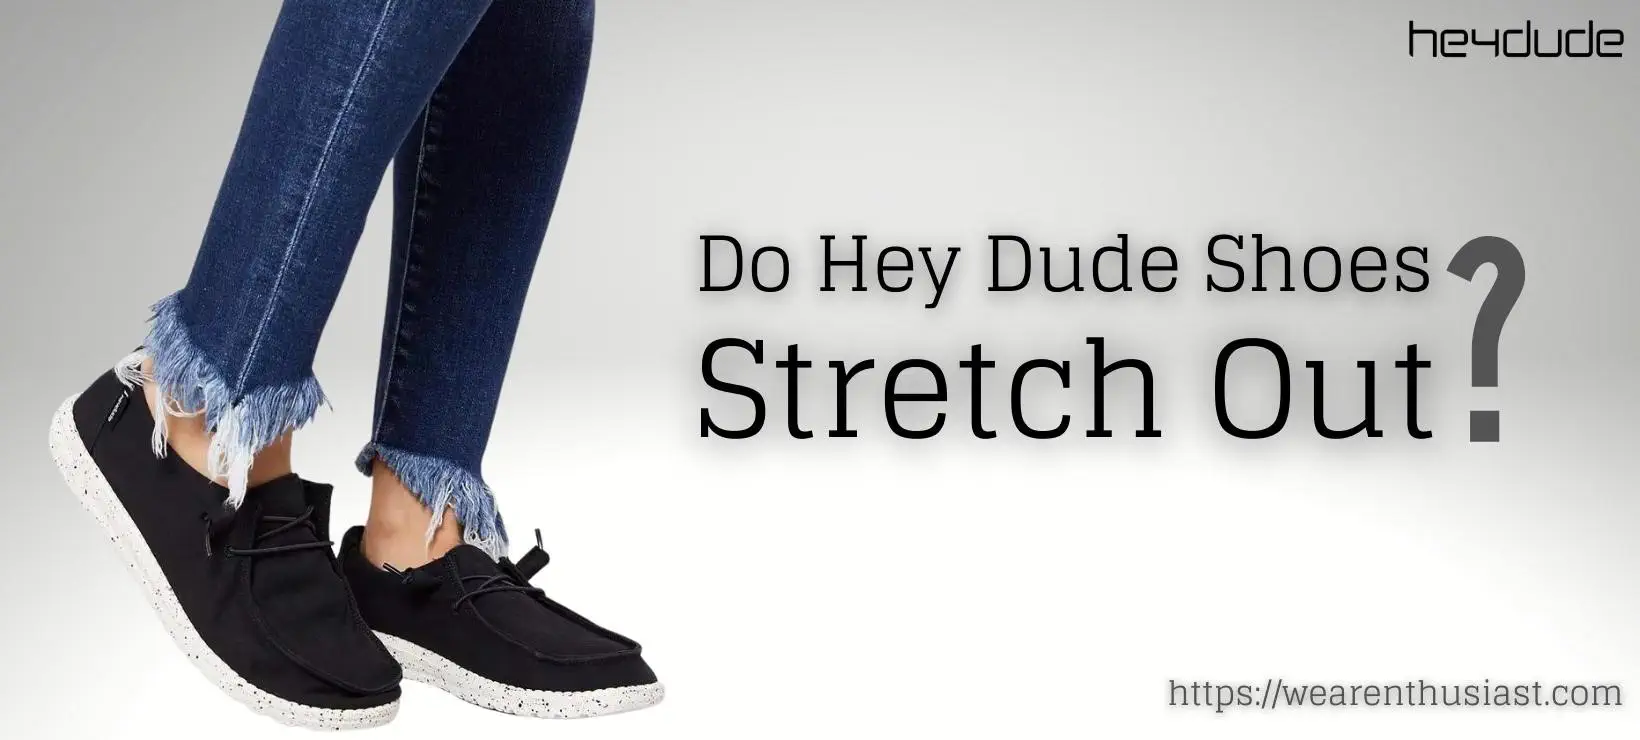 Do Hey Dude Shoes Stretch Out?